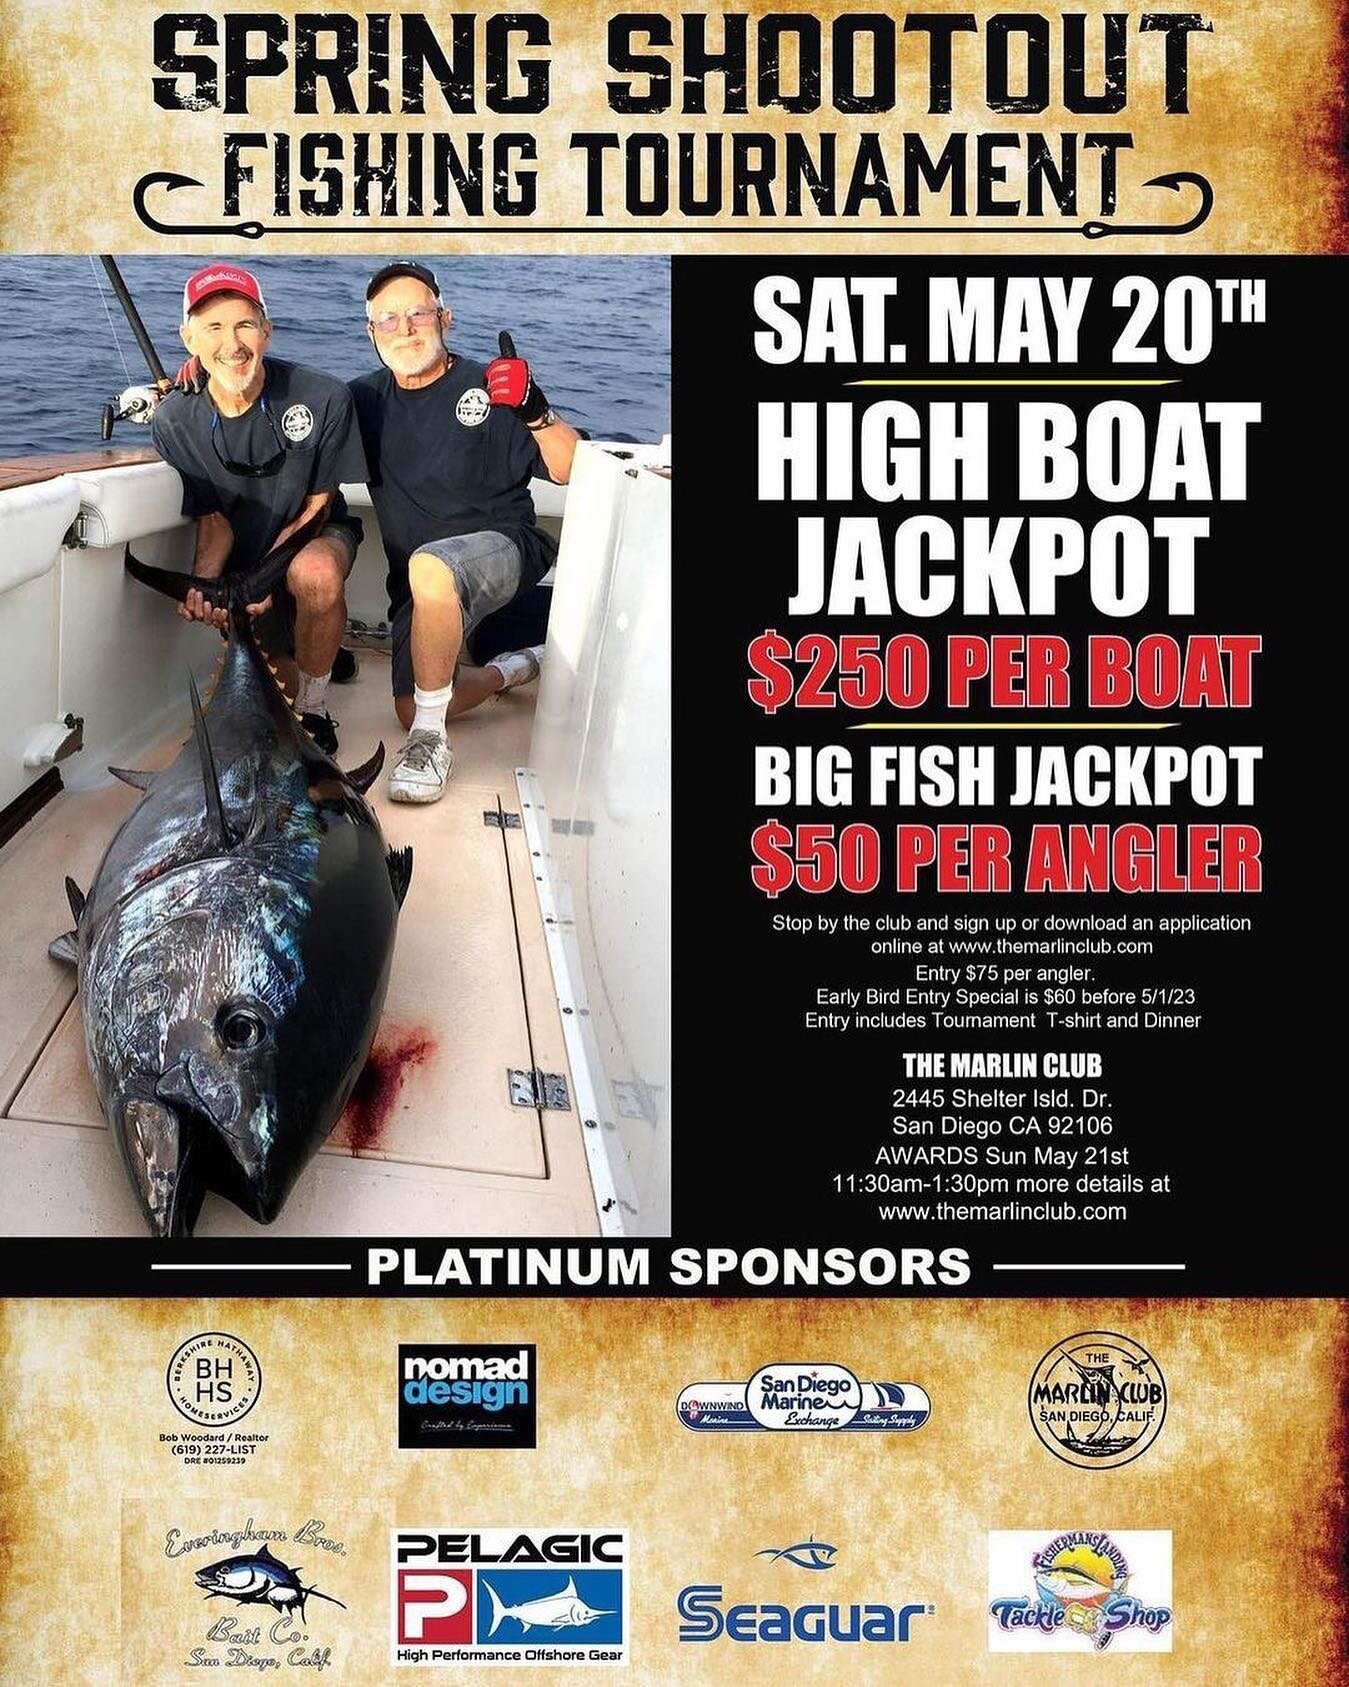 Last chance to sign up for The 2023 Spring Shootout this Saturday, May 20th! Captains meeting tomorrow night at 6:00pm at the club house. 
.
More info and entry forms are available on our website. www.TheMarlinClub.com 
.
.
#SanDiegoFishing #fishingt